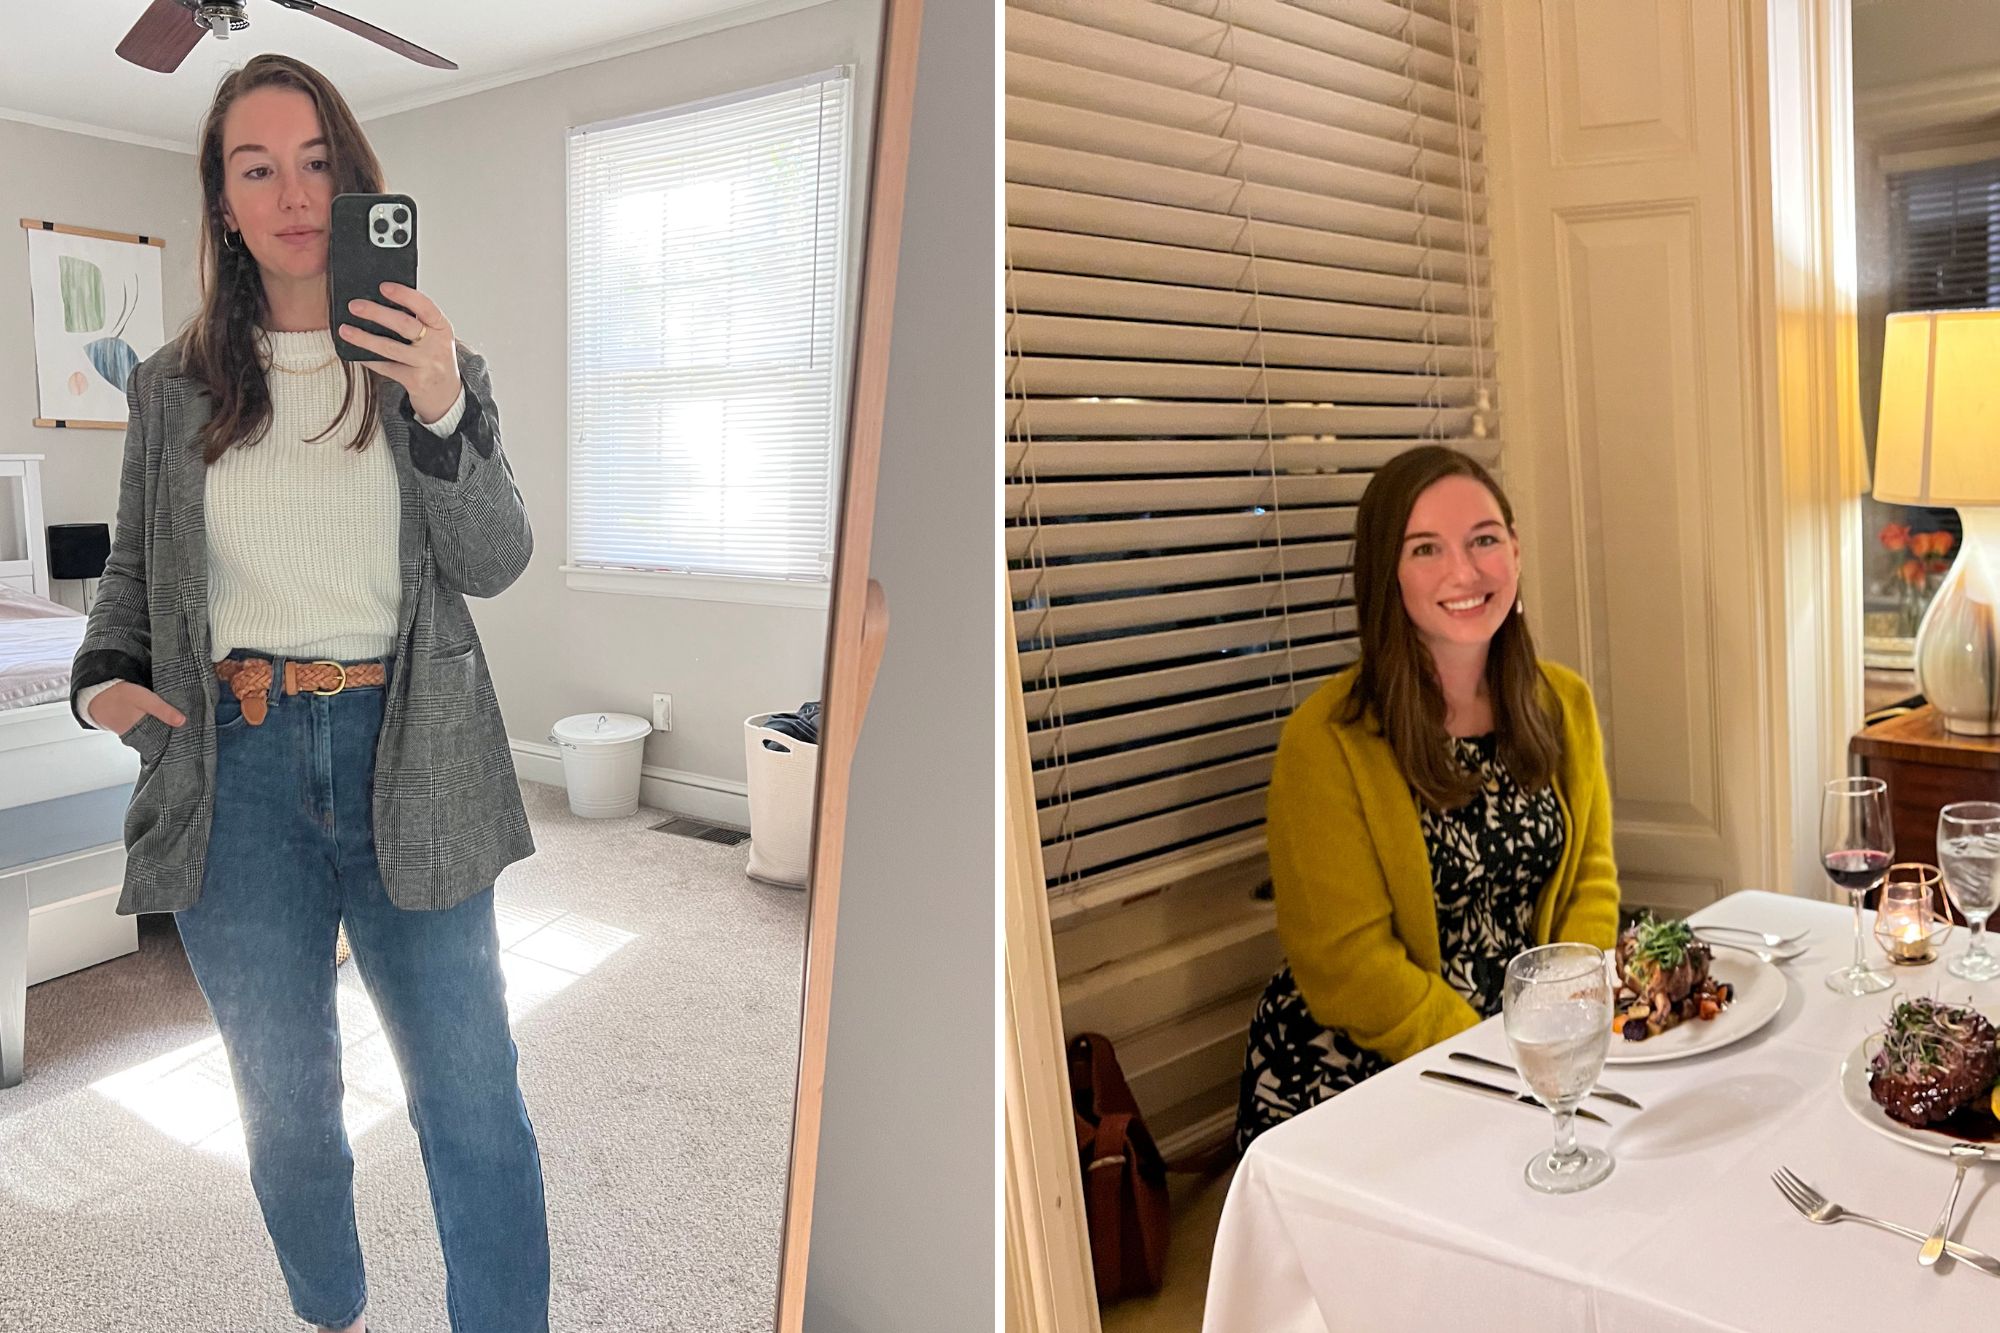 Alyssa wears a blazer, jeans, and white sweater on the left, and on the right she wears a floral dress and green cardigan